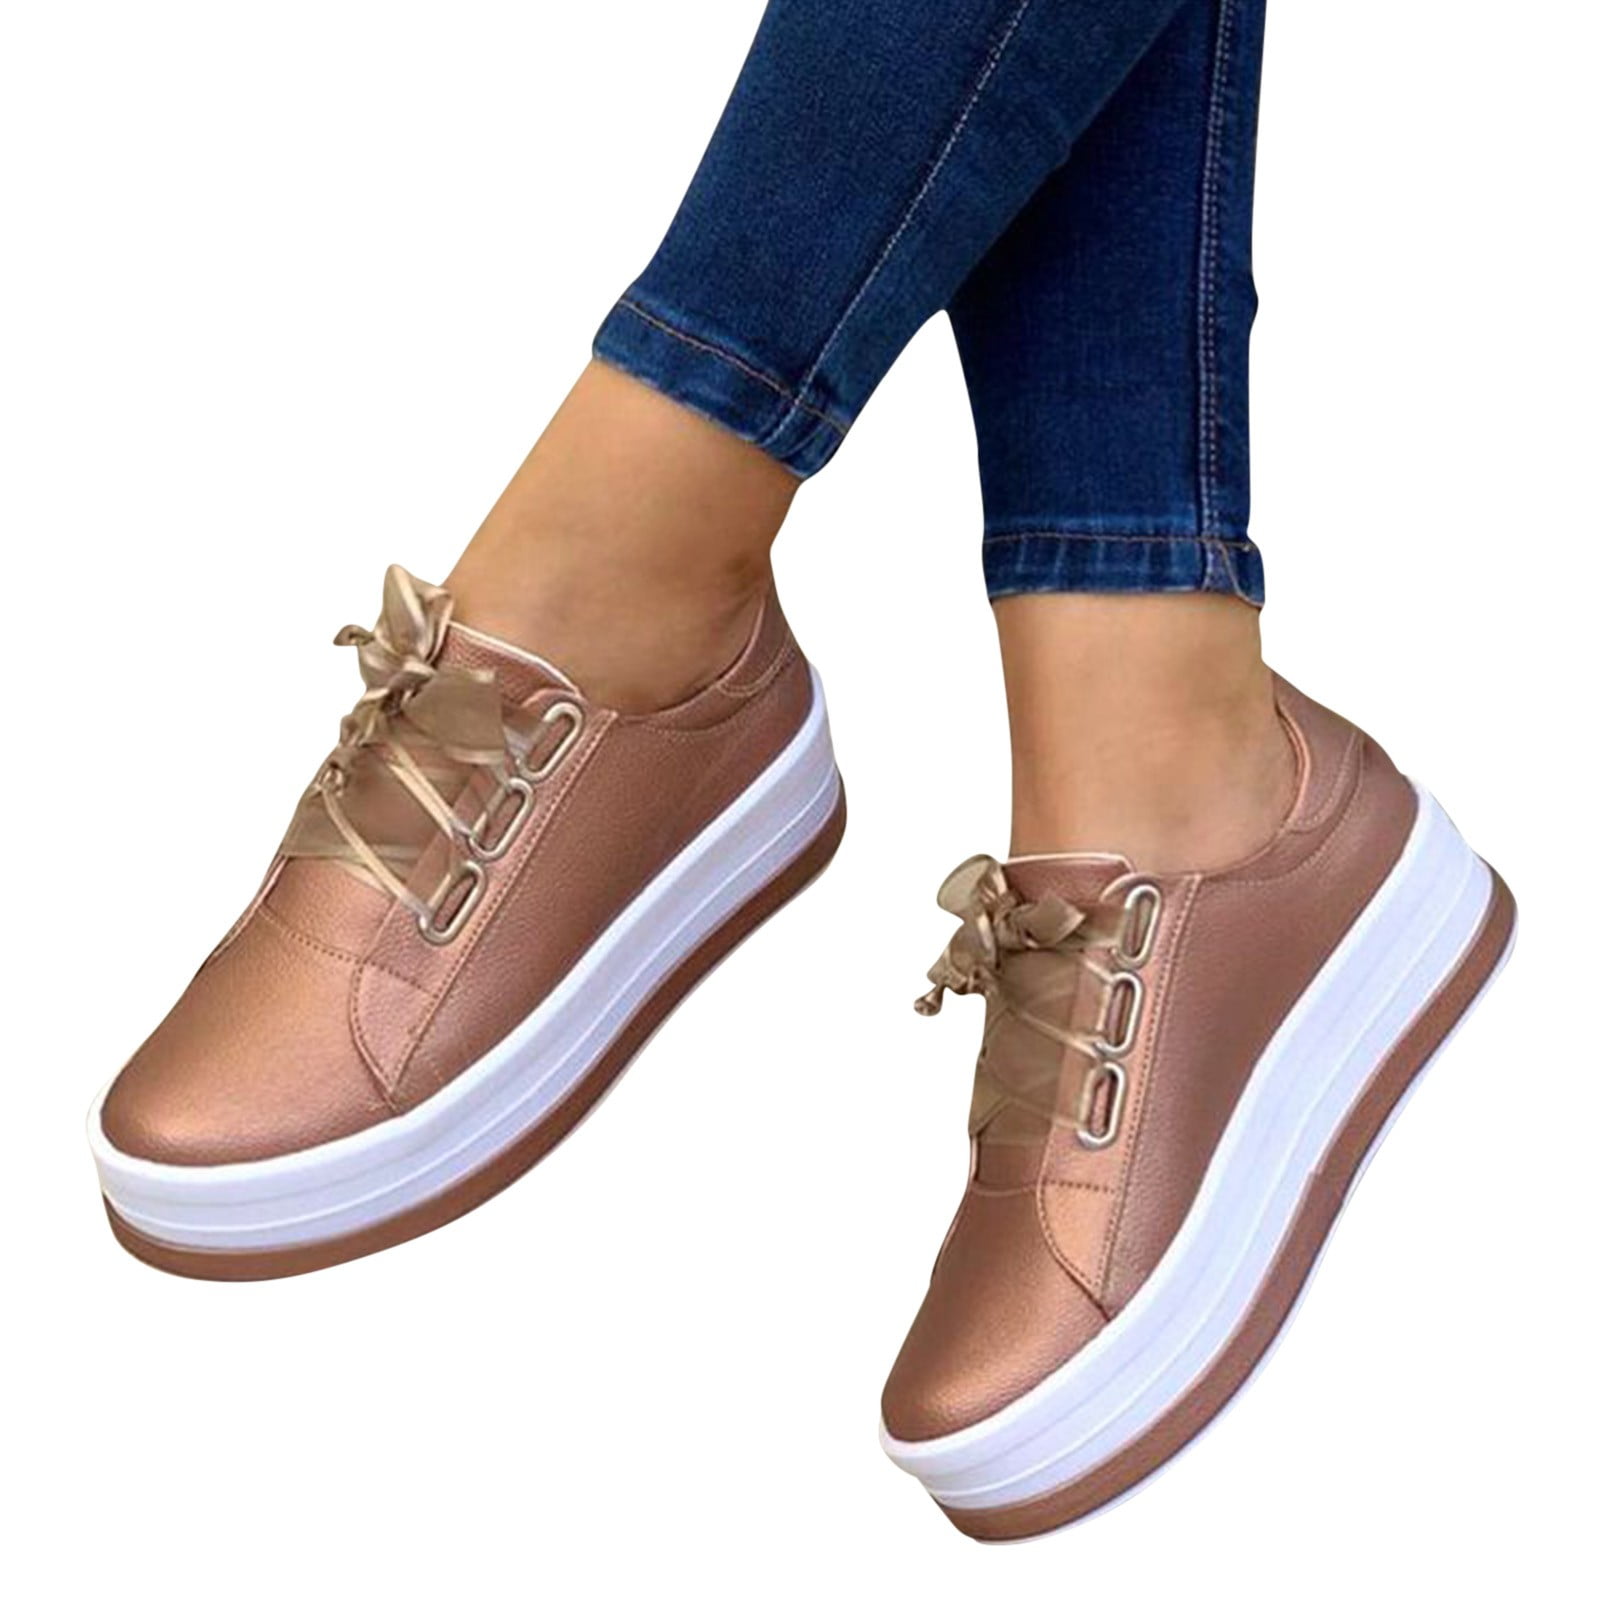 Metallic Lace Up Low Top Star Sneakers-Rose Gold